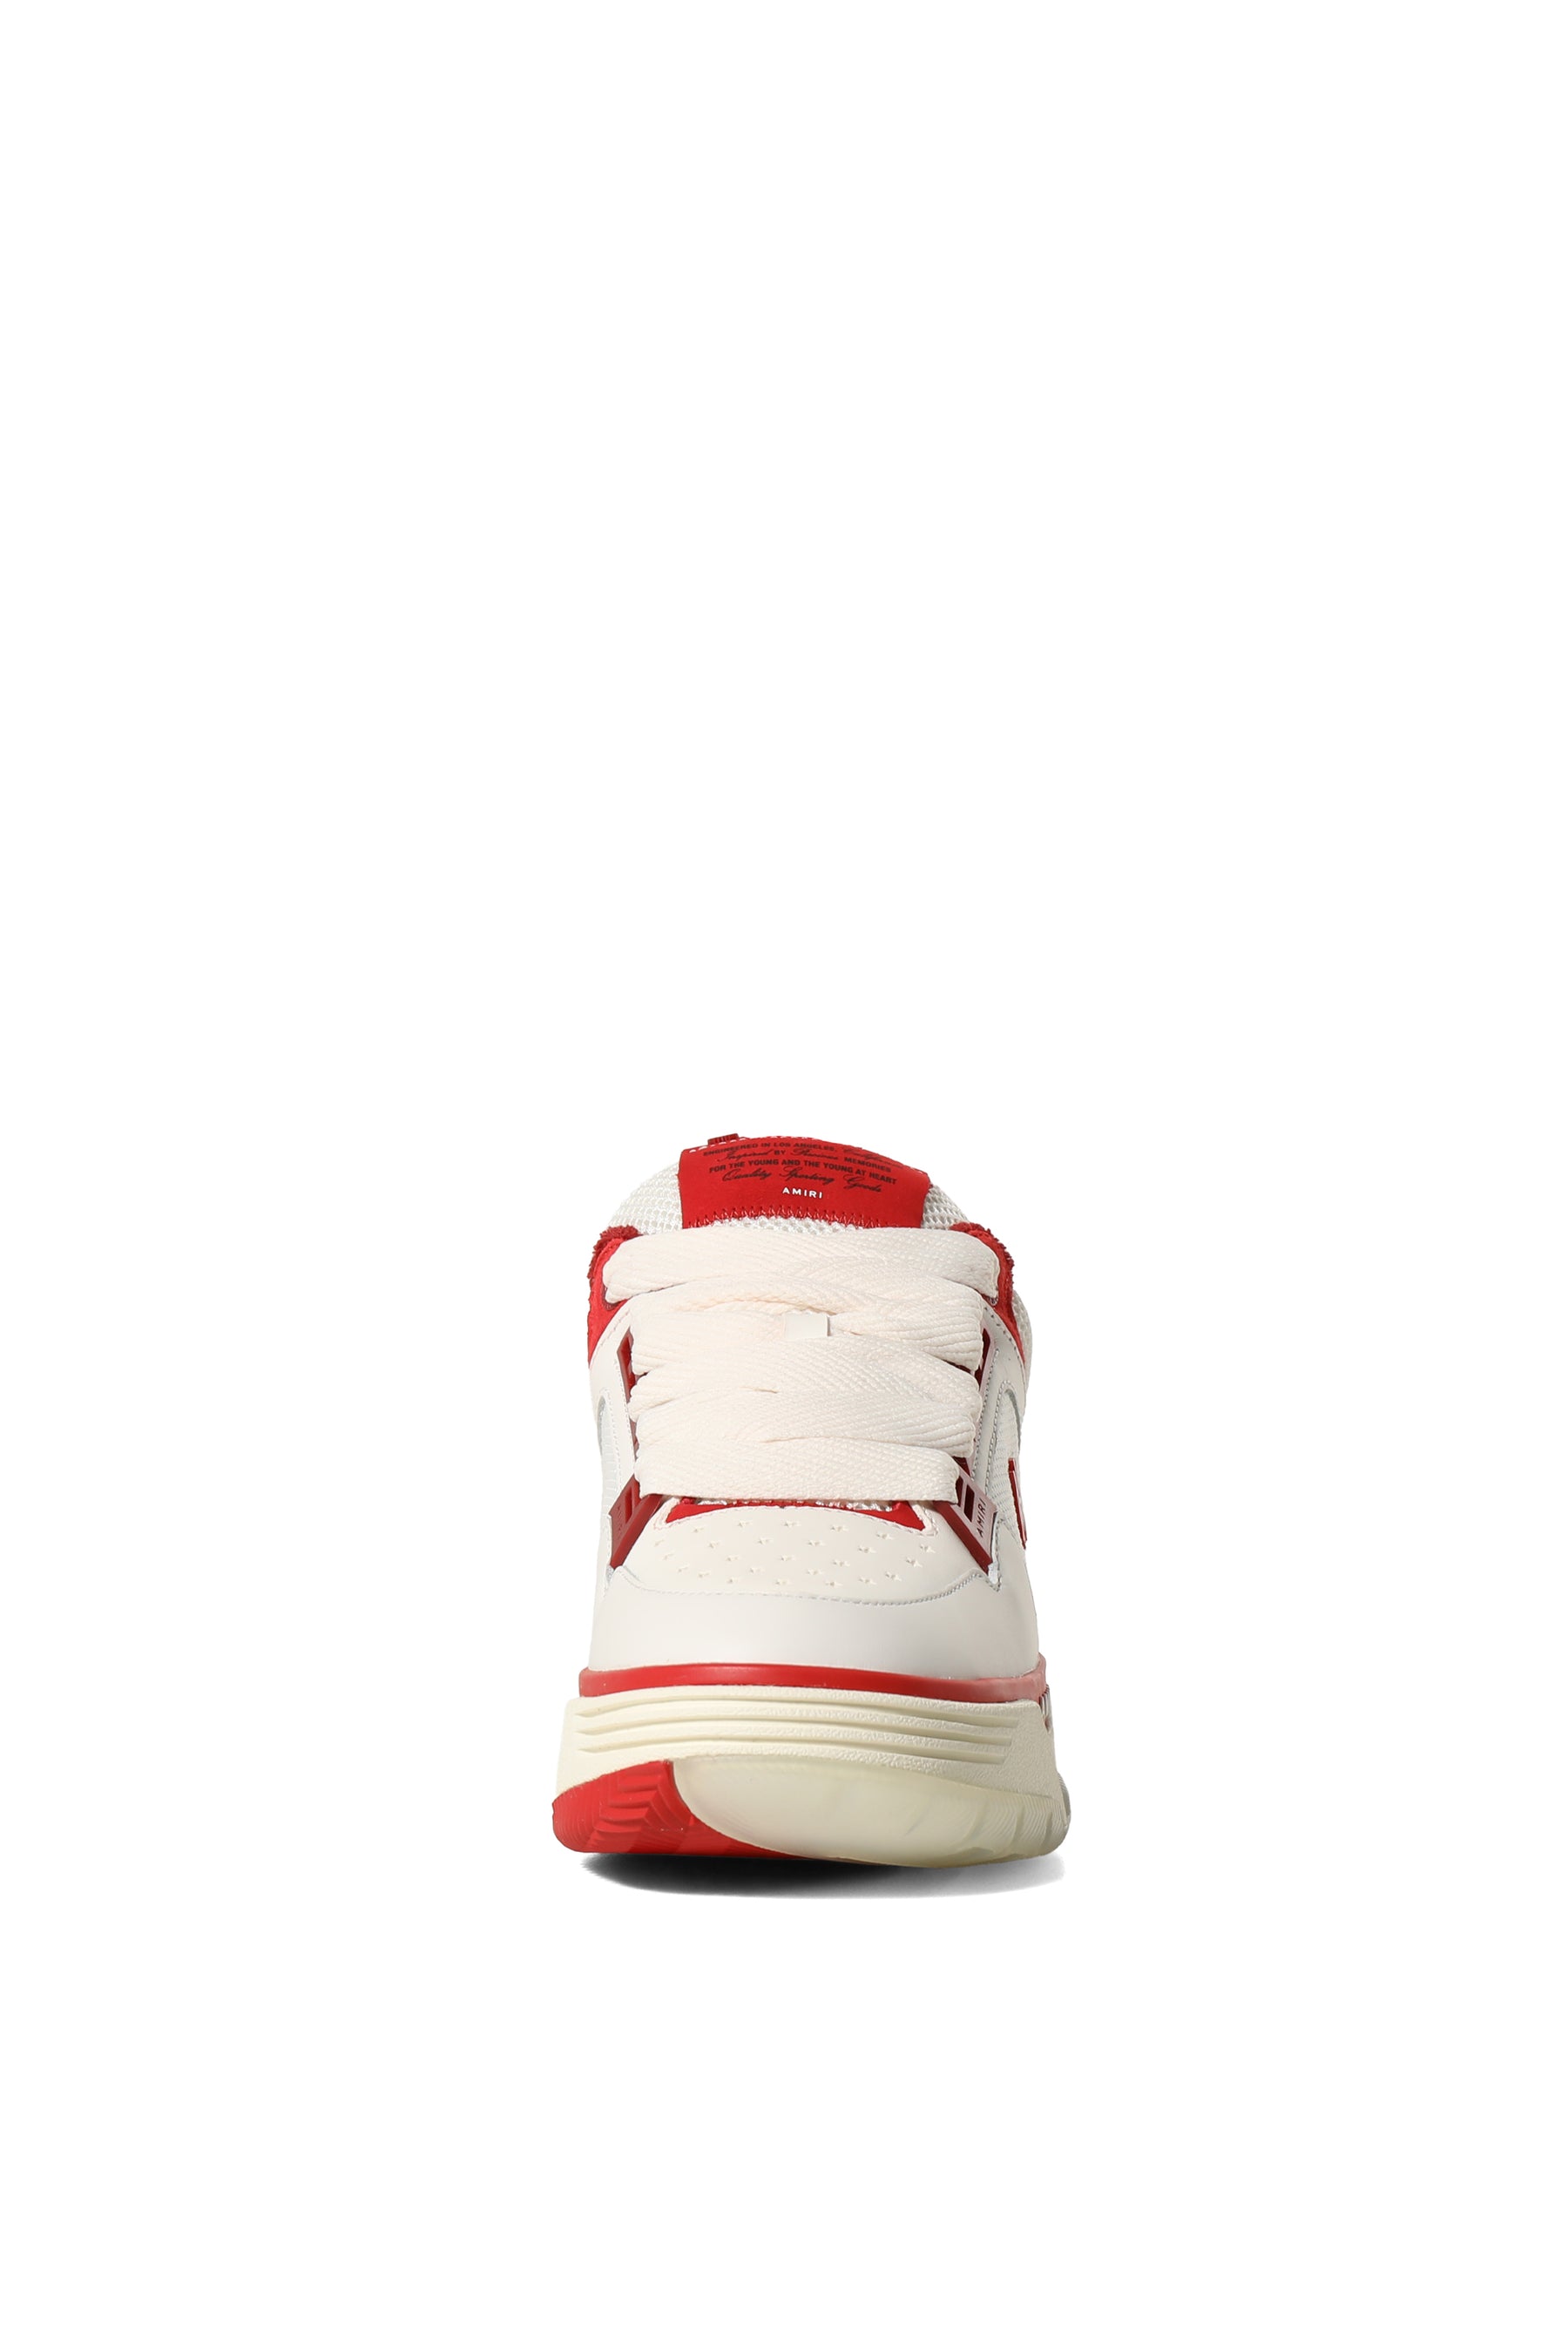 MA-1 / WHT RED